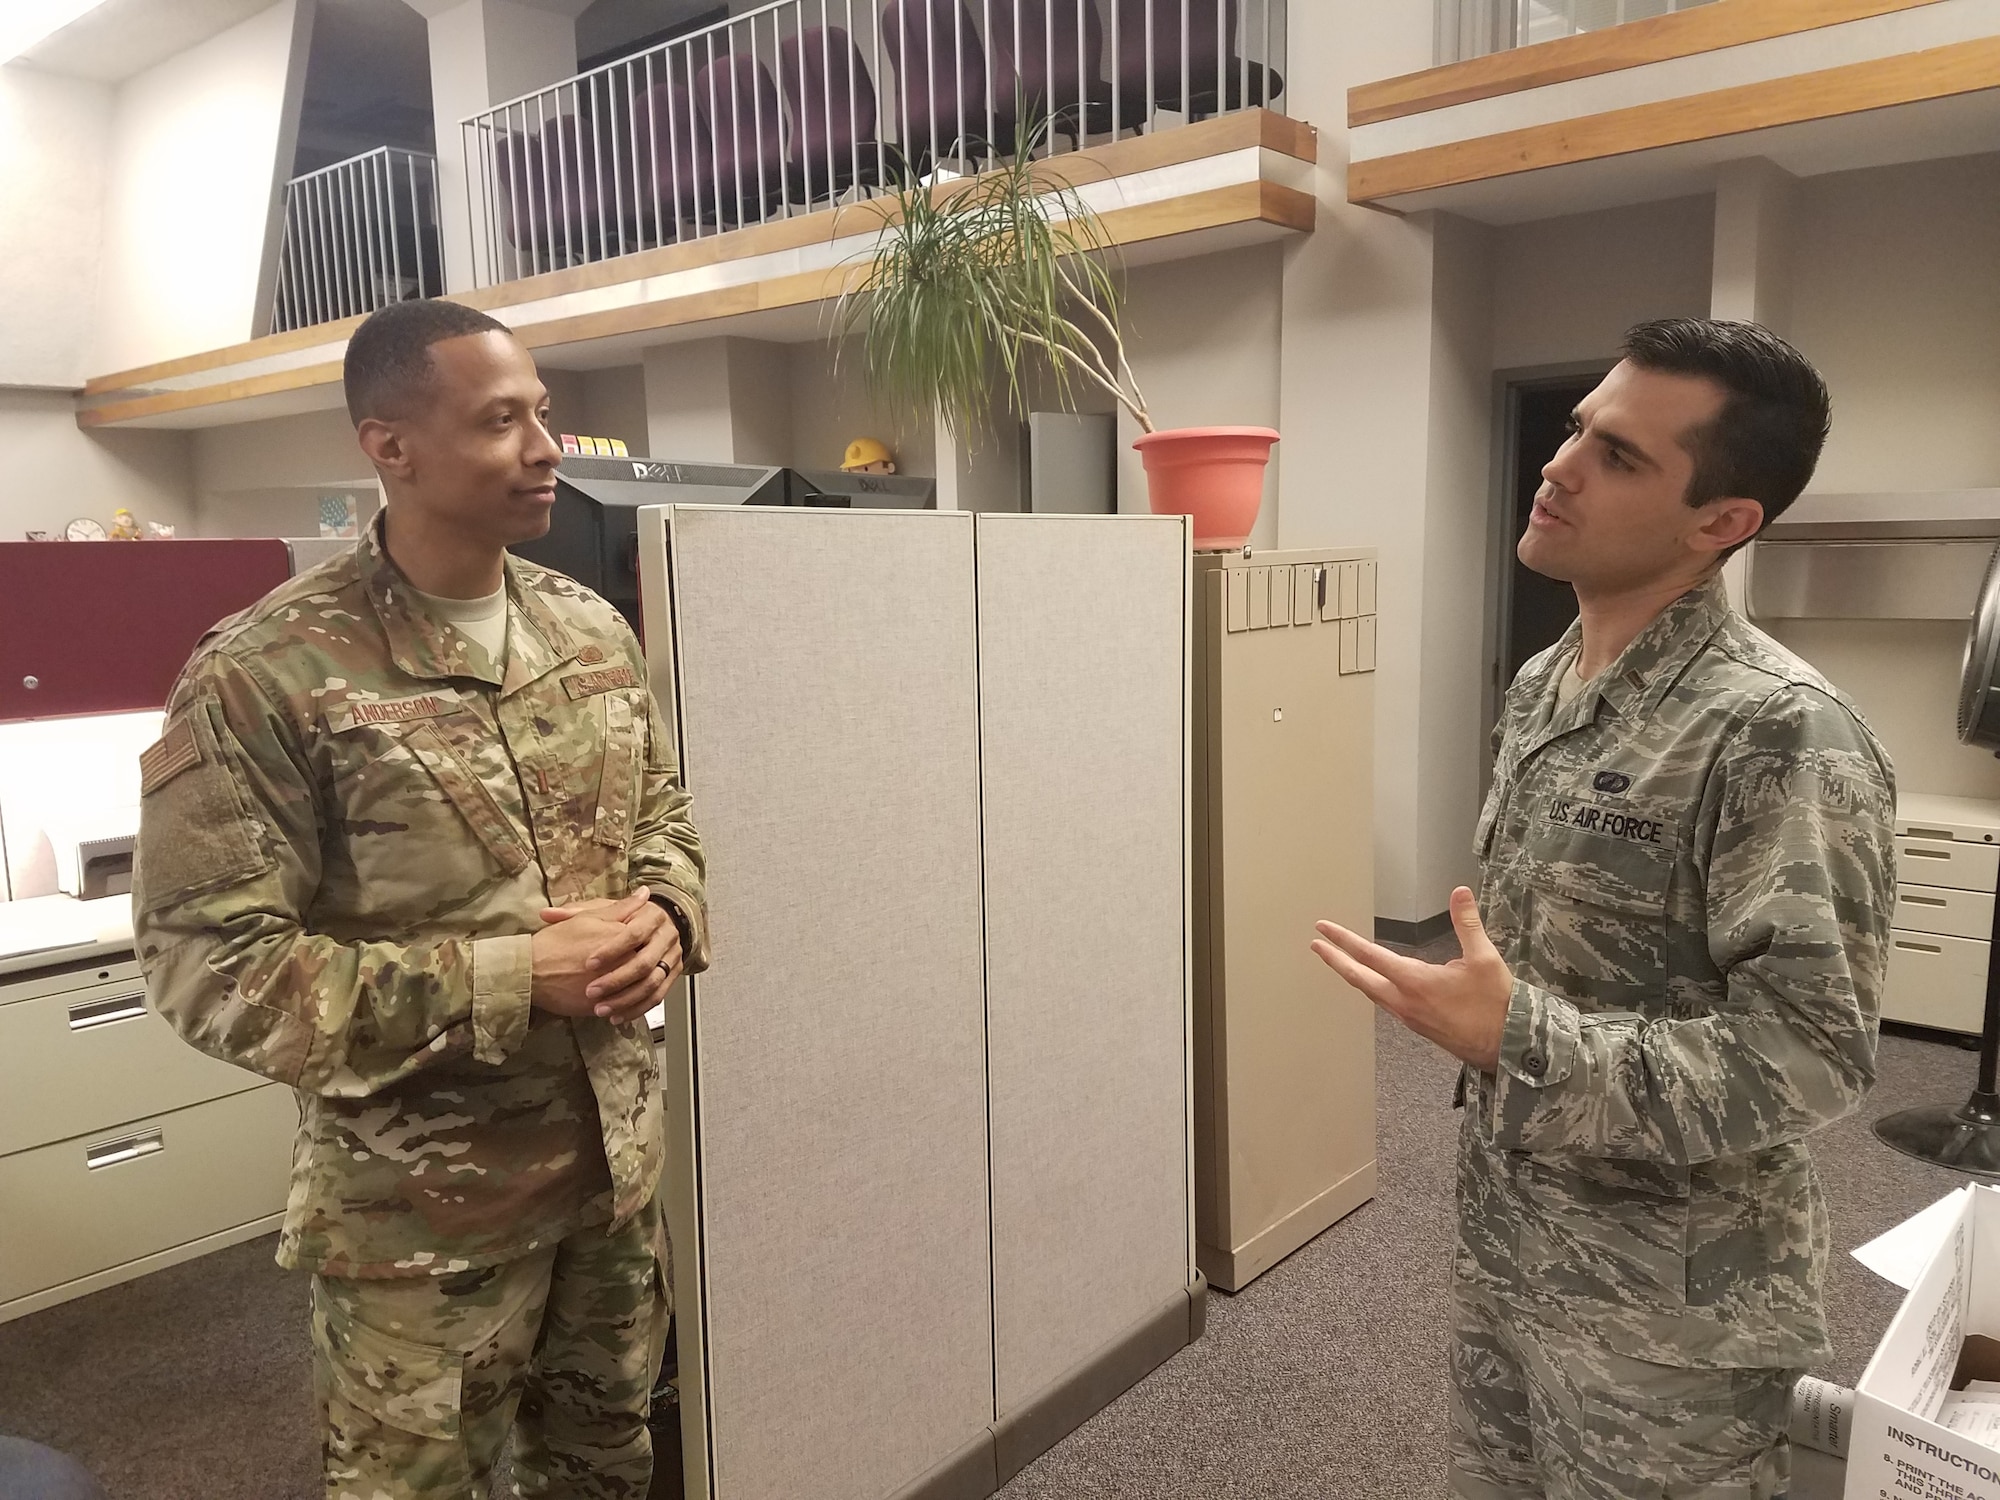 2nd Lt. Evan Ewing (right), contracting specialist with the Air Force Life Cycle Management Center's Installation Contracting Division, discusses policy with 2nd. Lt. Thomas Anderson, also a contracting specialist with the division.